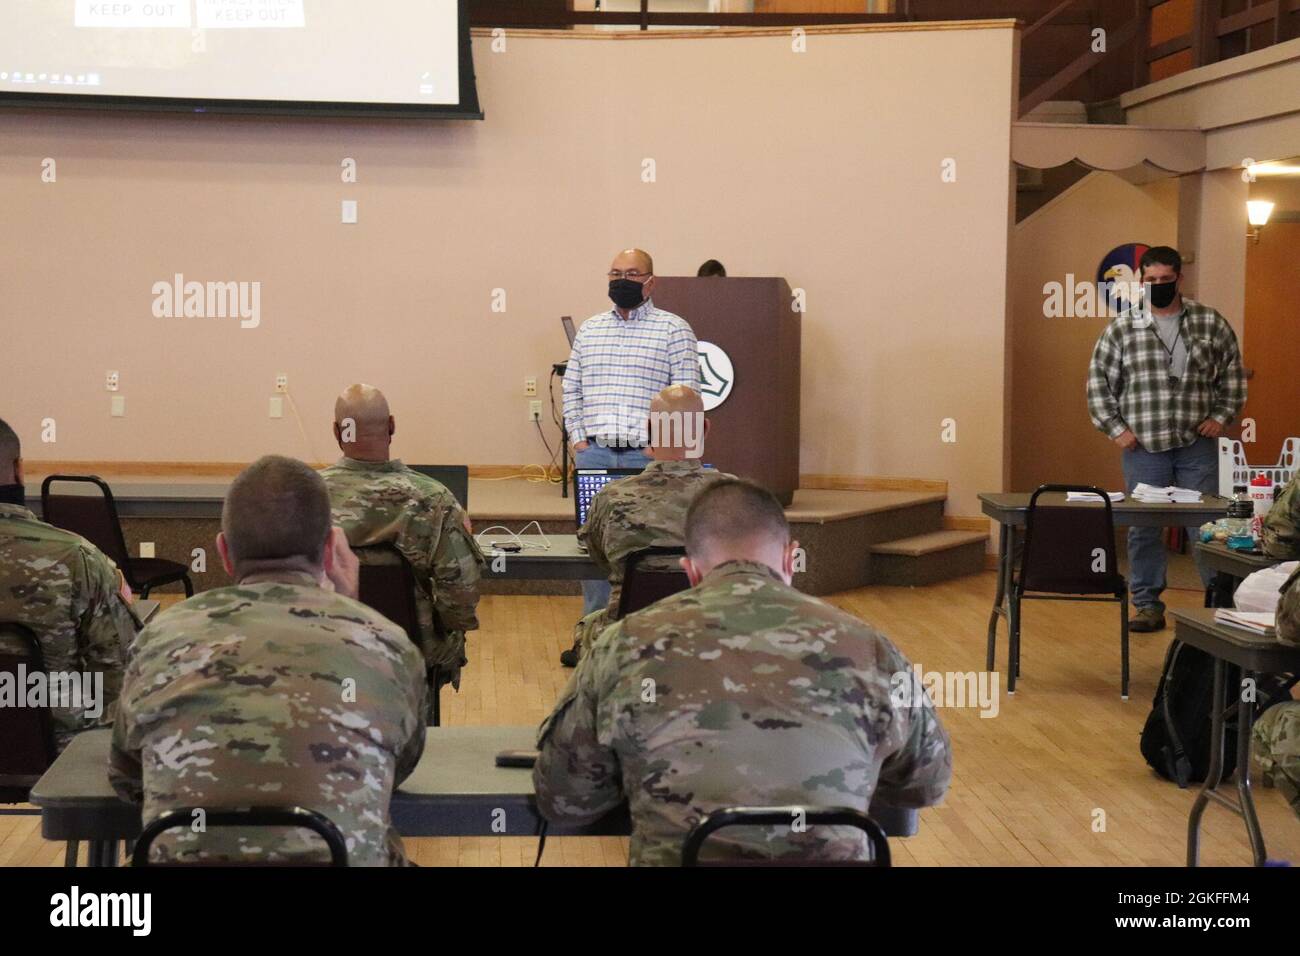 Reynaldo Vellido, range officer with the Fort McCoy Directorate of Plans, Training, Mobilization and Security (DPTMS), briefs 23 service members attending the DPTMS Training Workshop on April 8, 2021, in building 905 at Fort McCoy, Wis. This was the first workshop held by the directorate to assist unit representatives with the processes and requirements to schedule and hold training at Fort McCoy. The workshop took place April 7-8 and participants learned about range safety, range operations, range maps, and more. Stock Photo